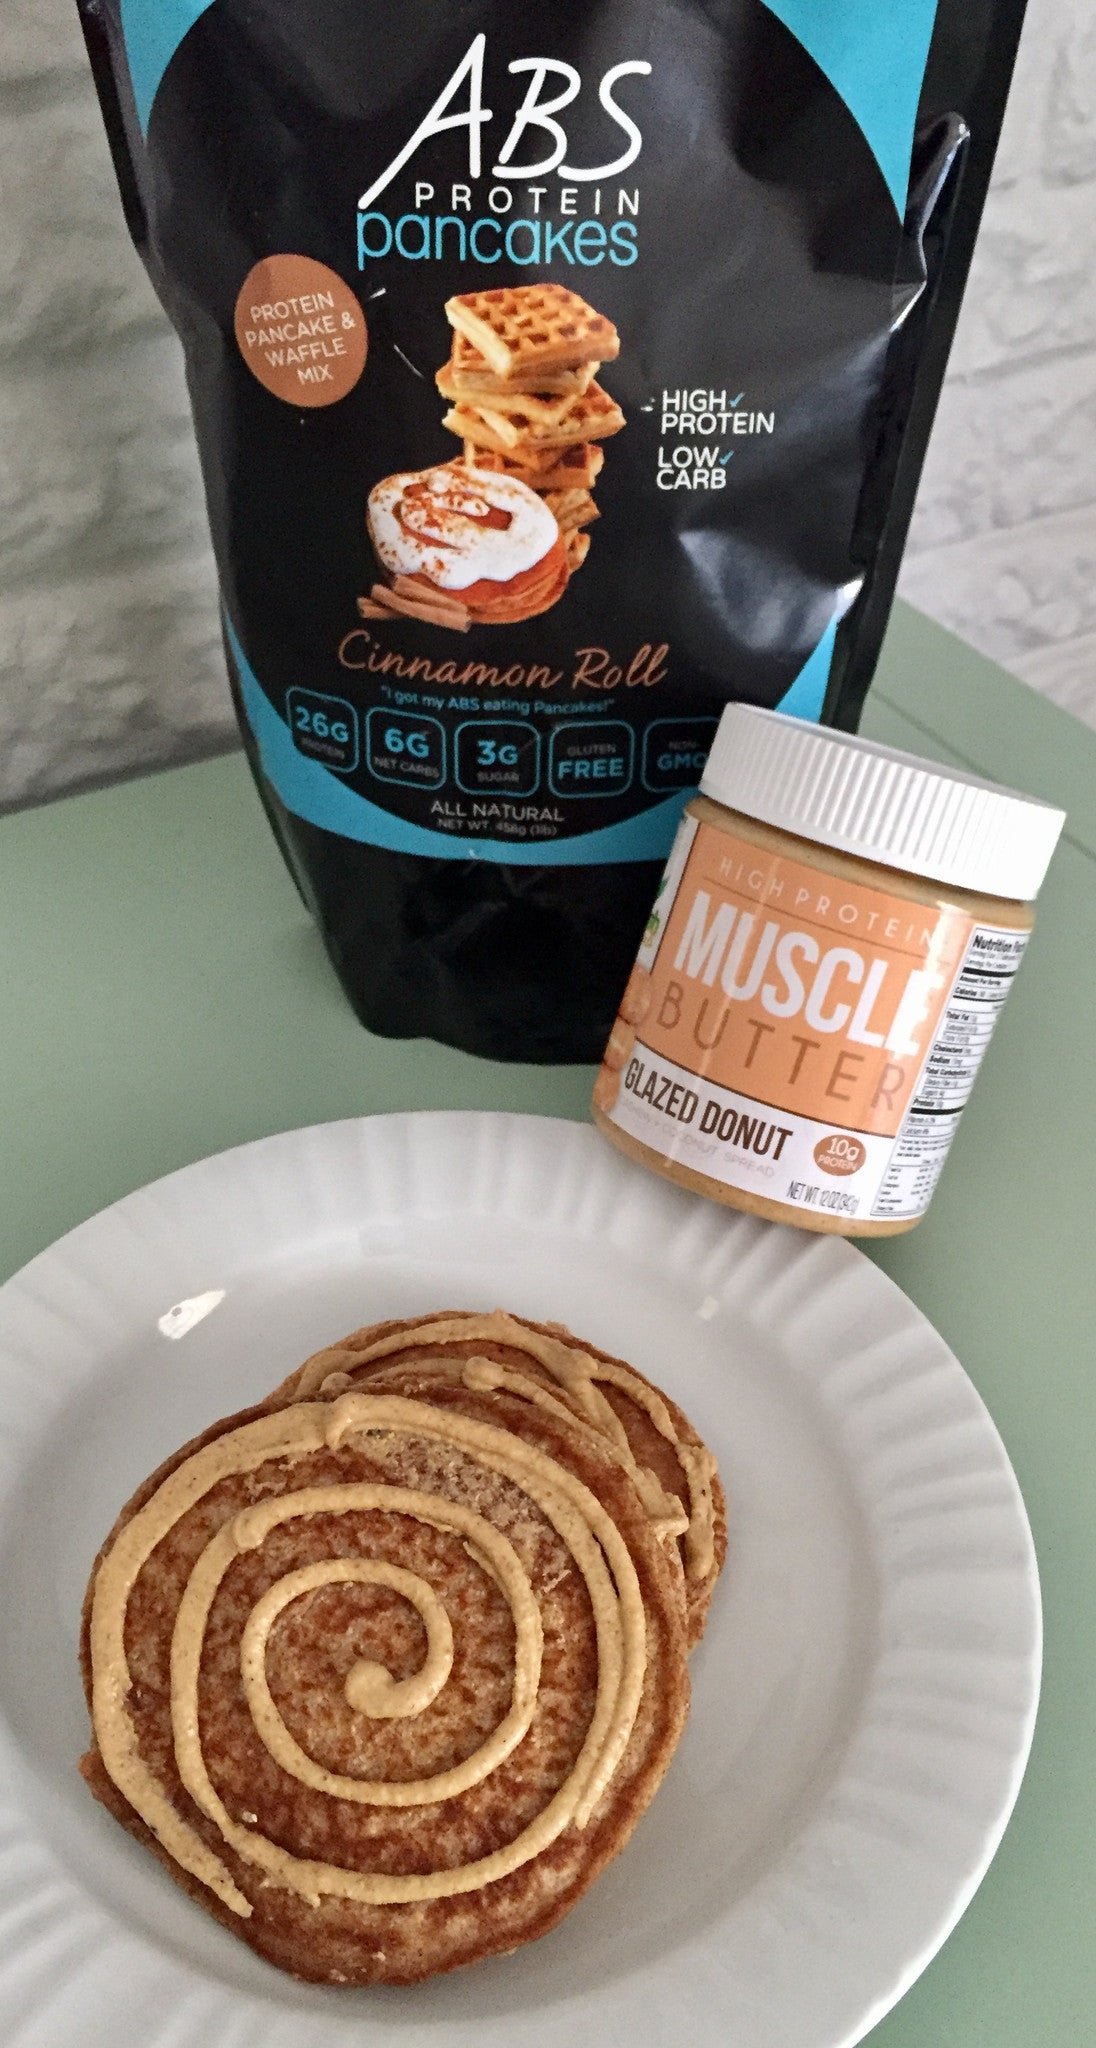 ABS & Muscle Butter Glazed Cinnamon Roll Protein Pancakes